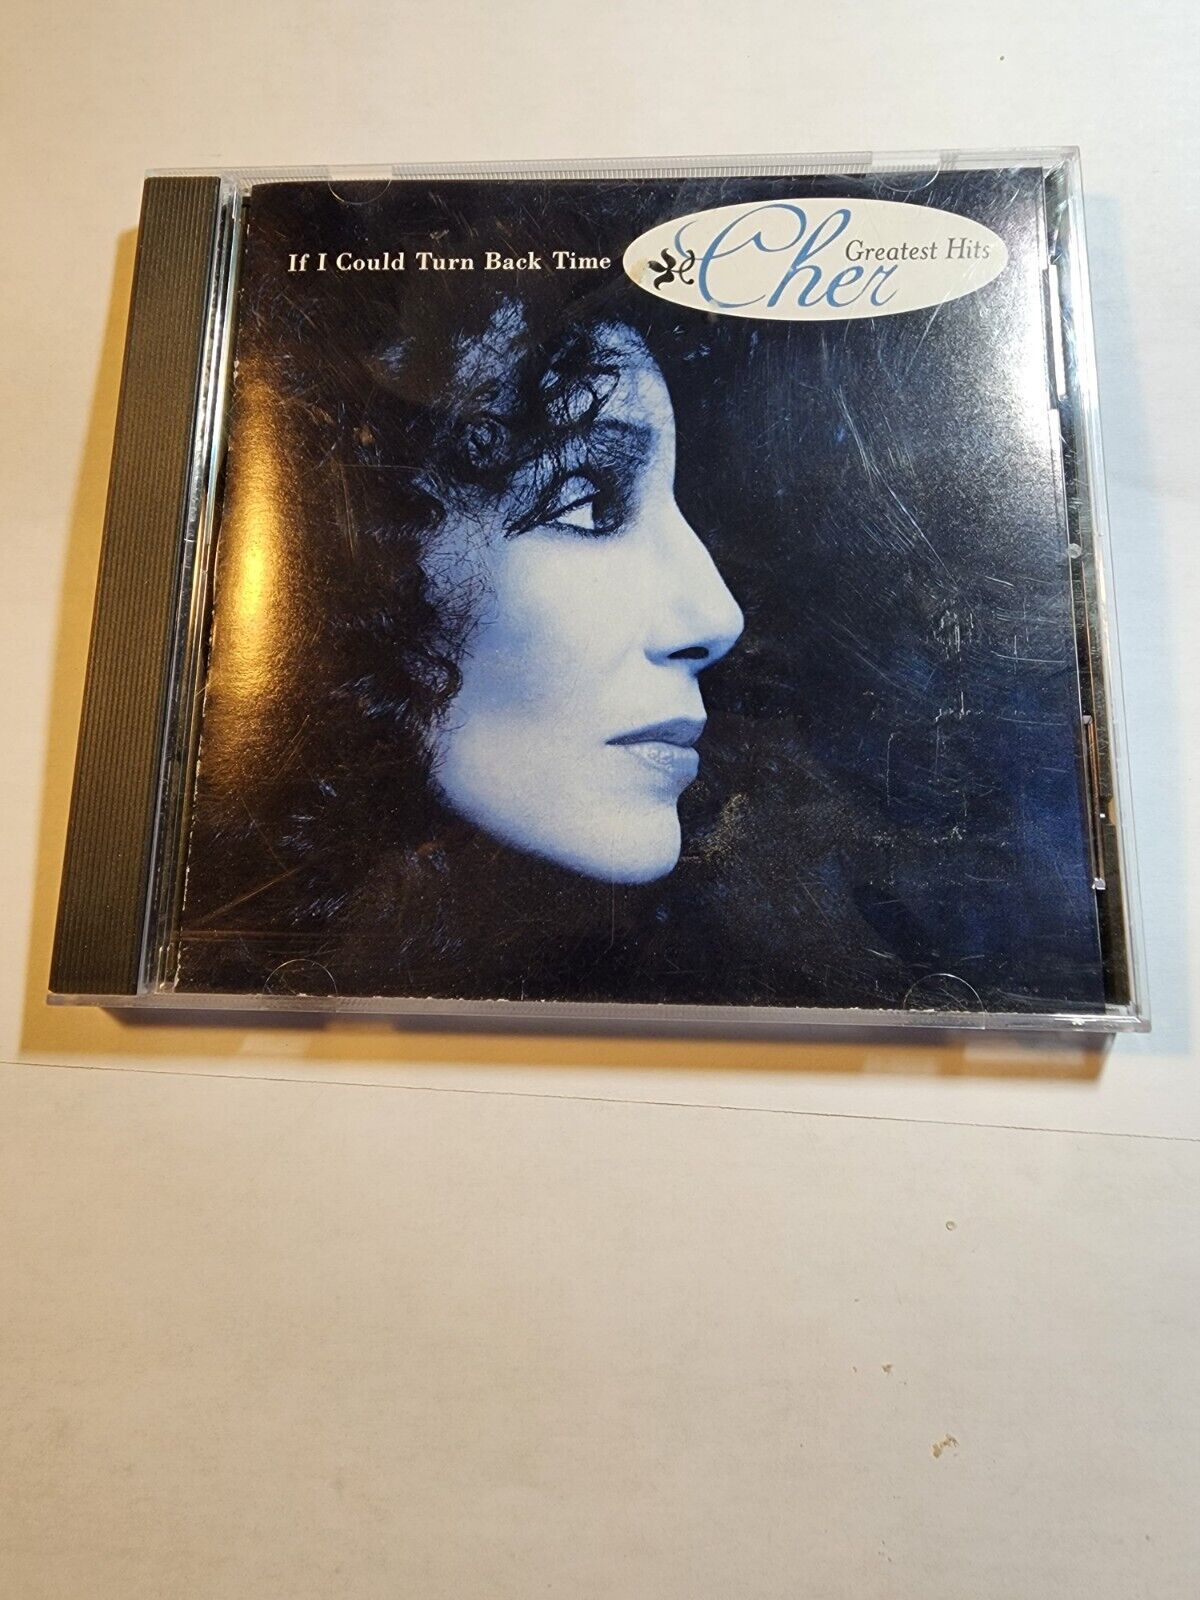 Cher\'s - Greatest Hits - If I Could Turn Back Time VG+/EX CD7